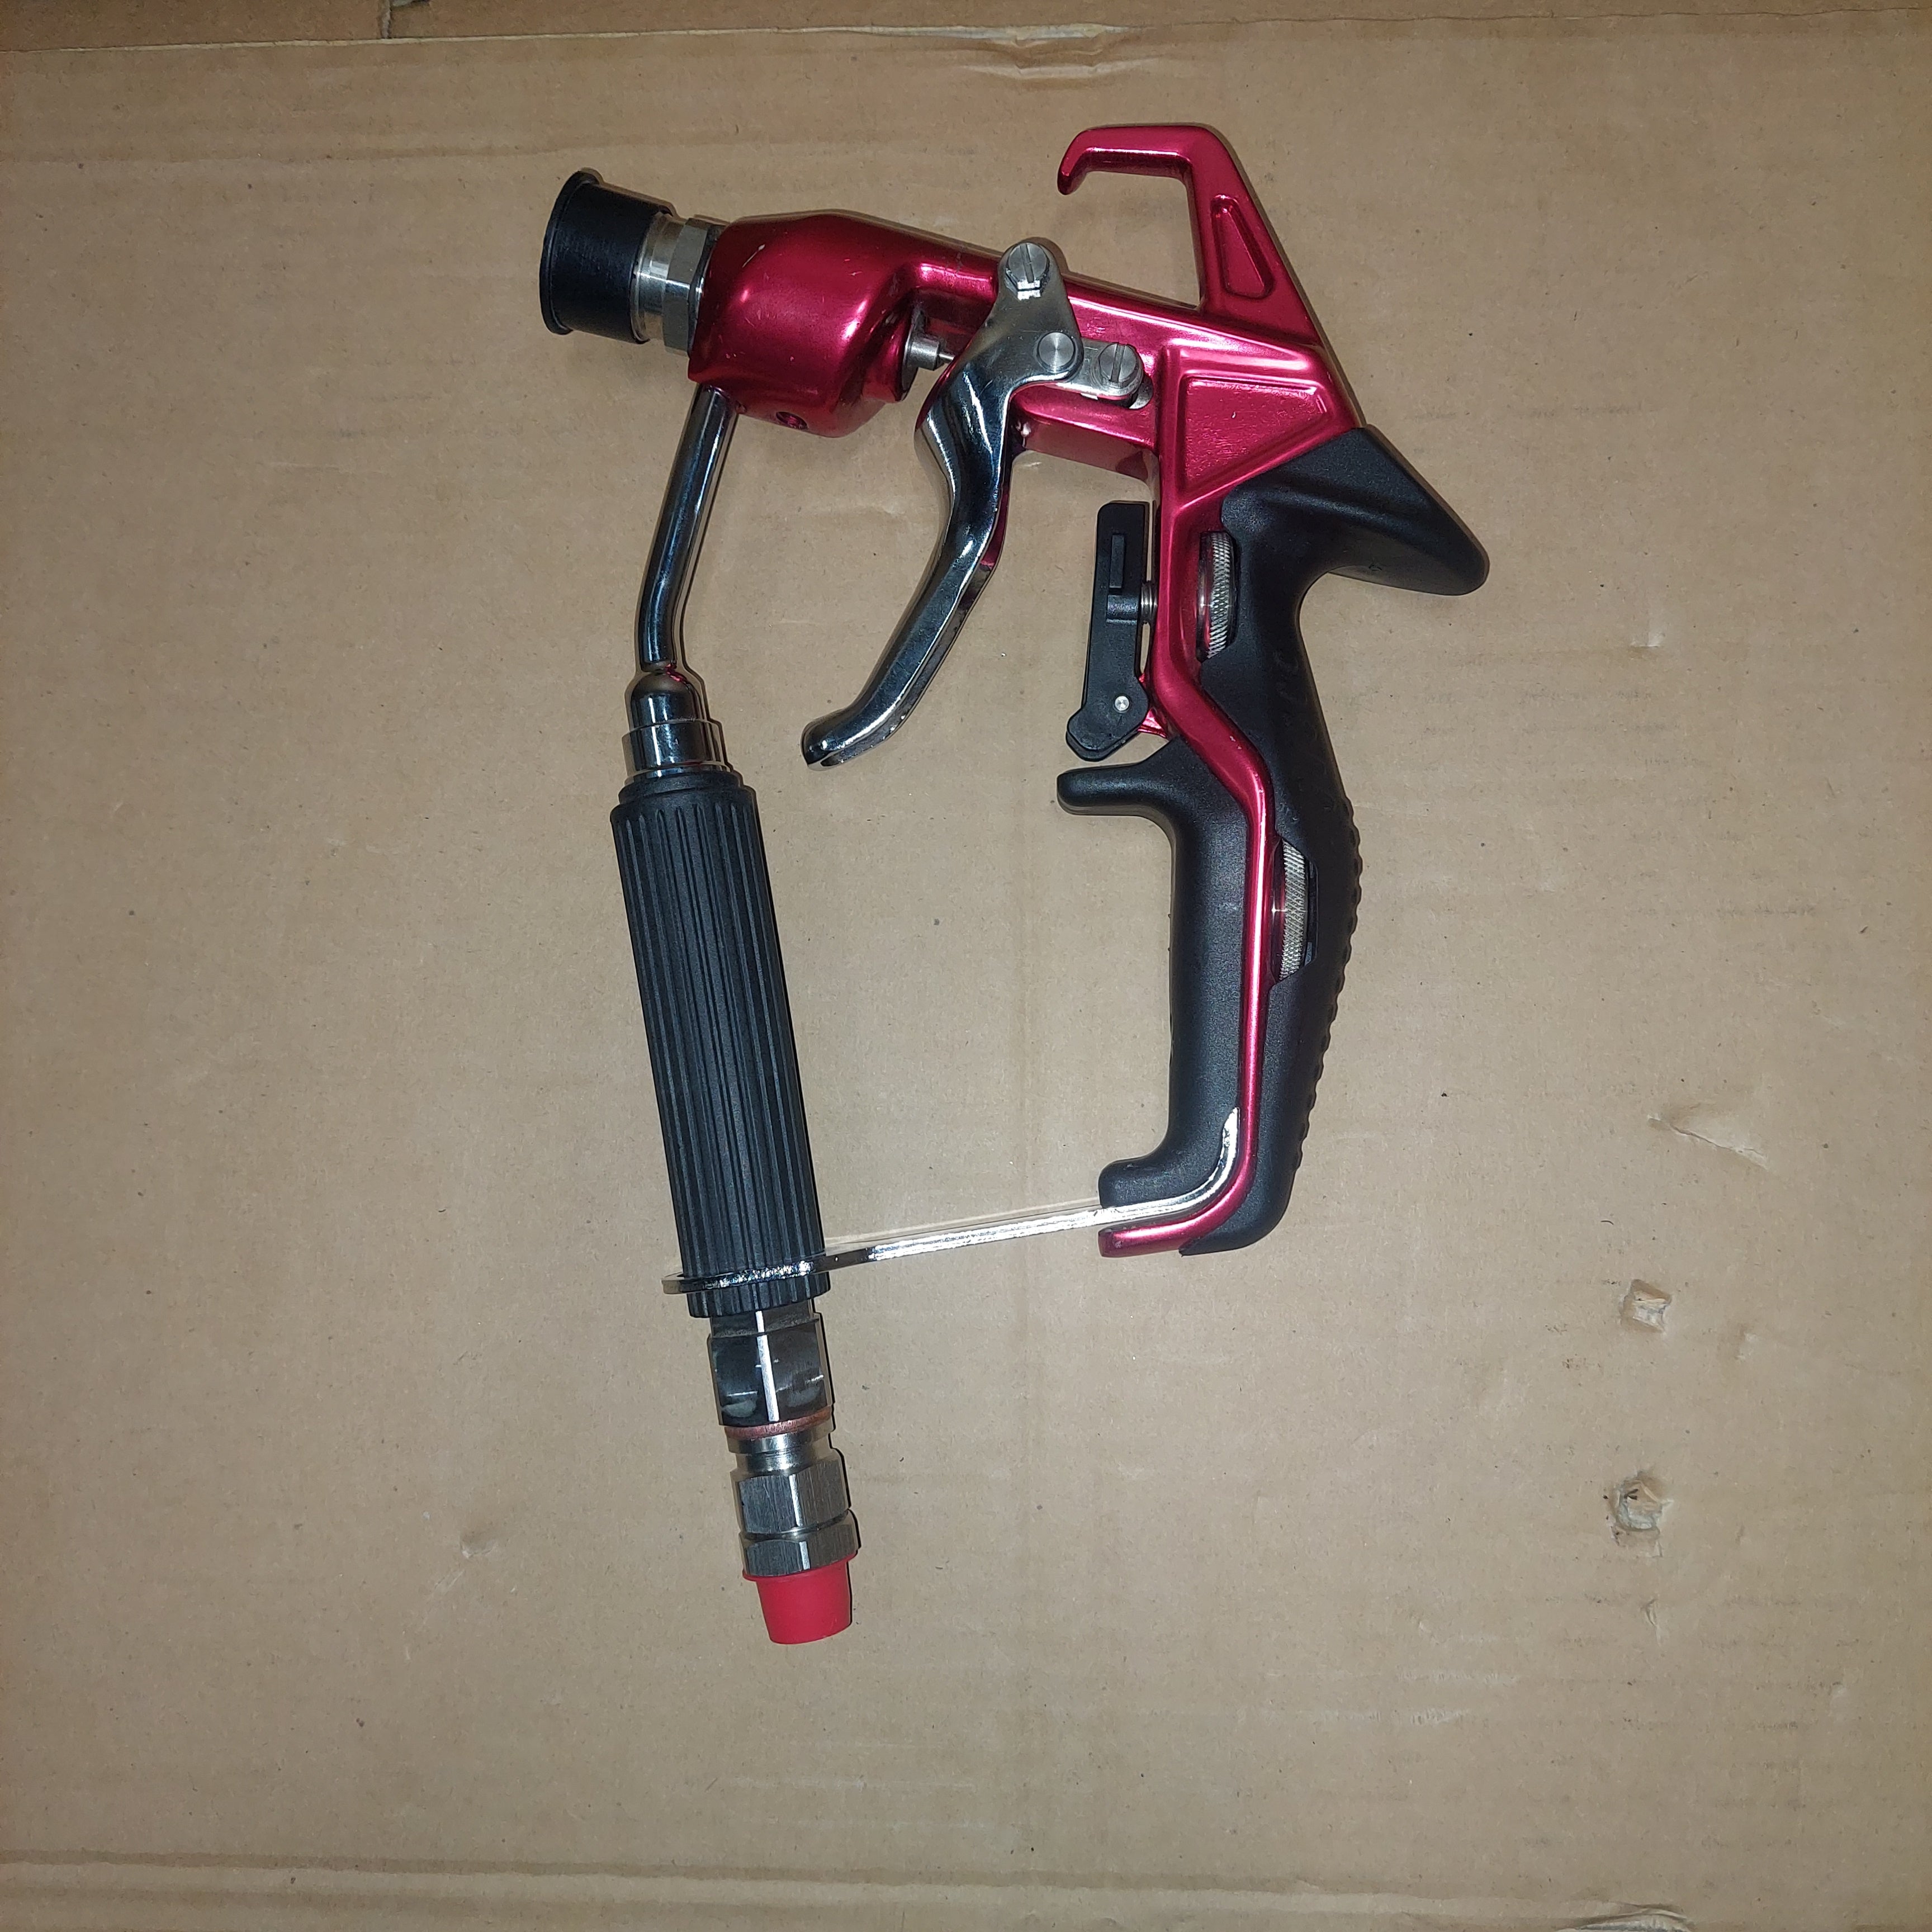 Airless 5,000 psi Filtered Paint Gun NO TIPS J163AB New